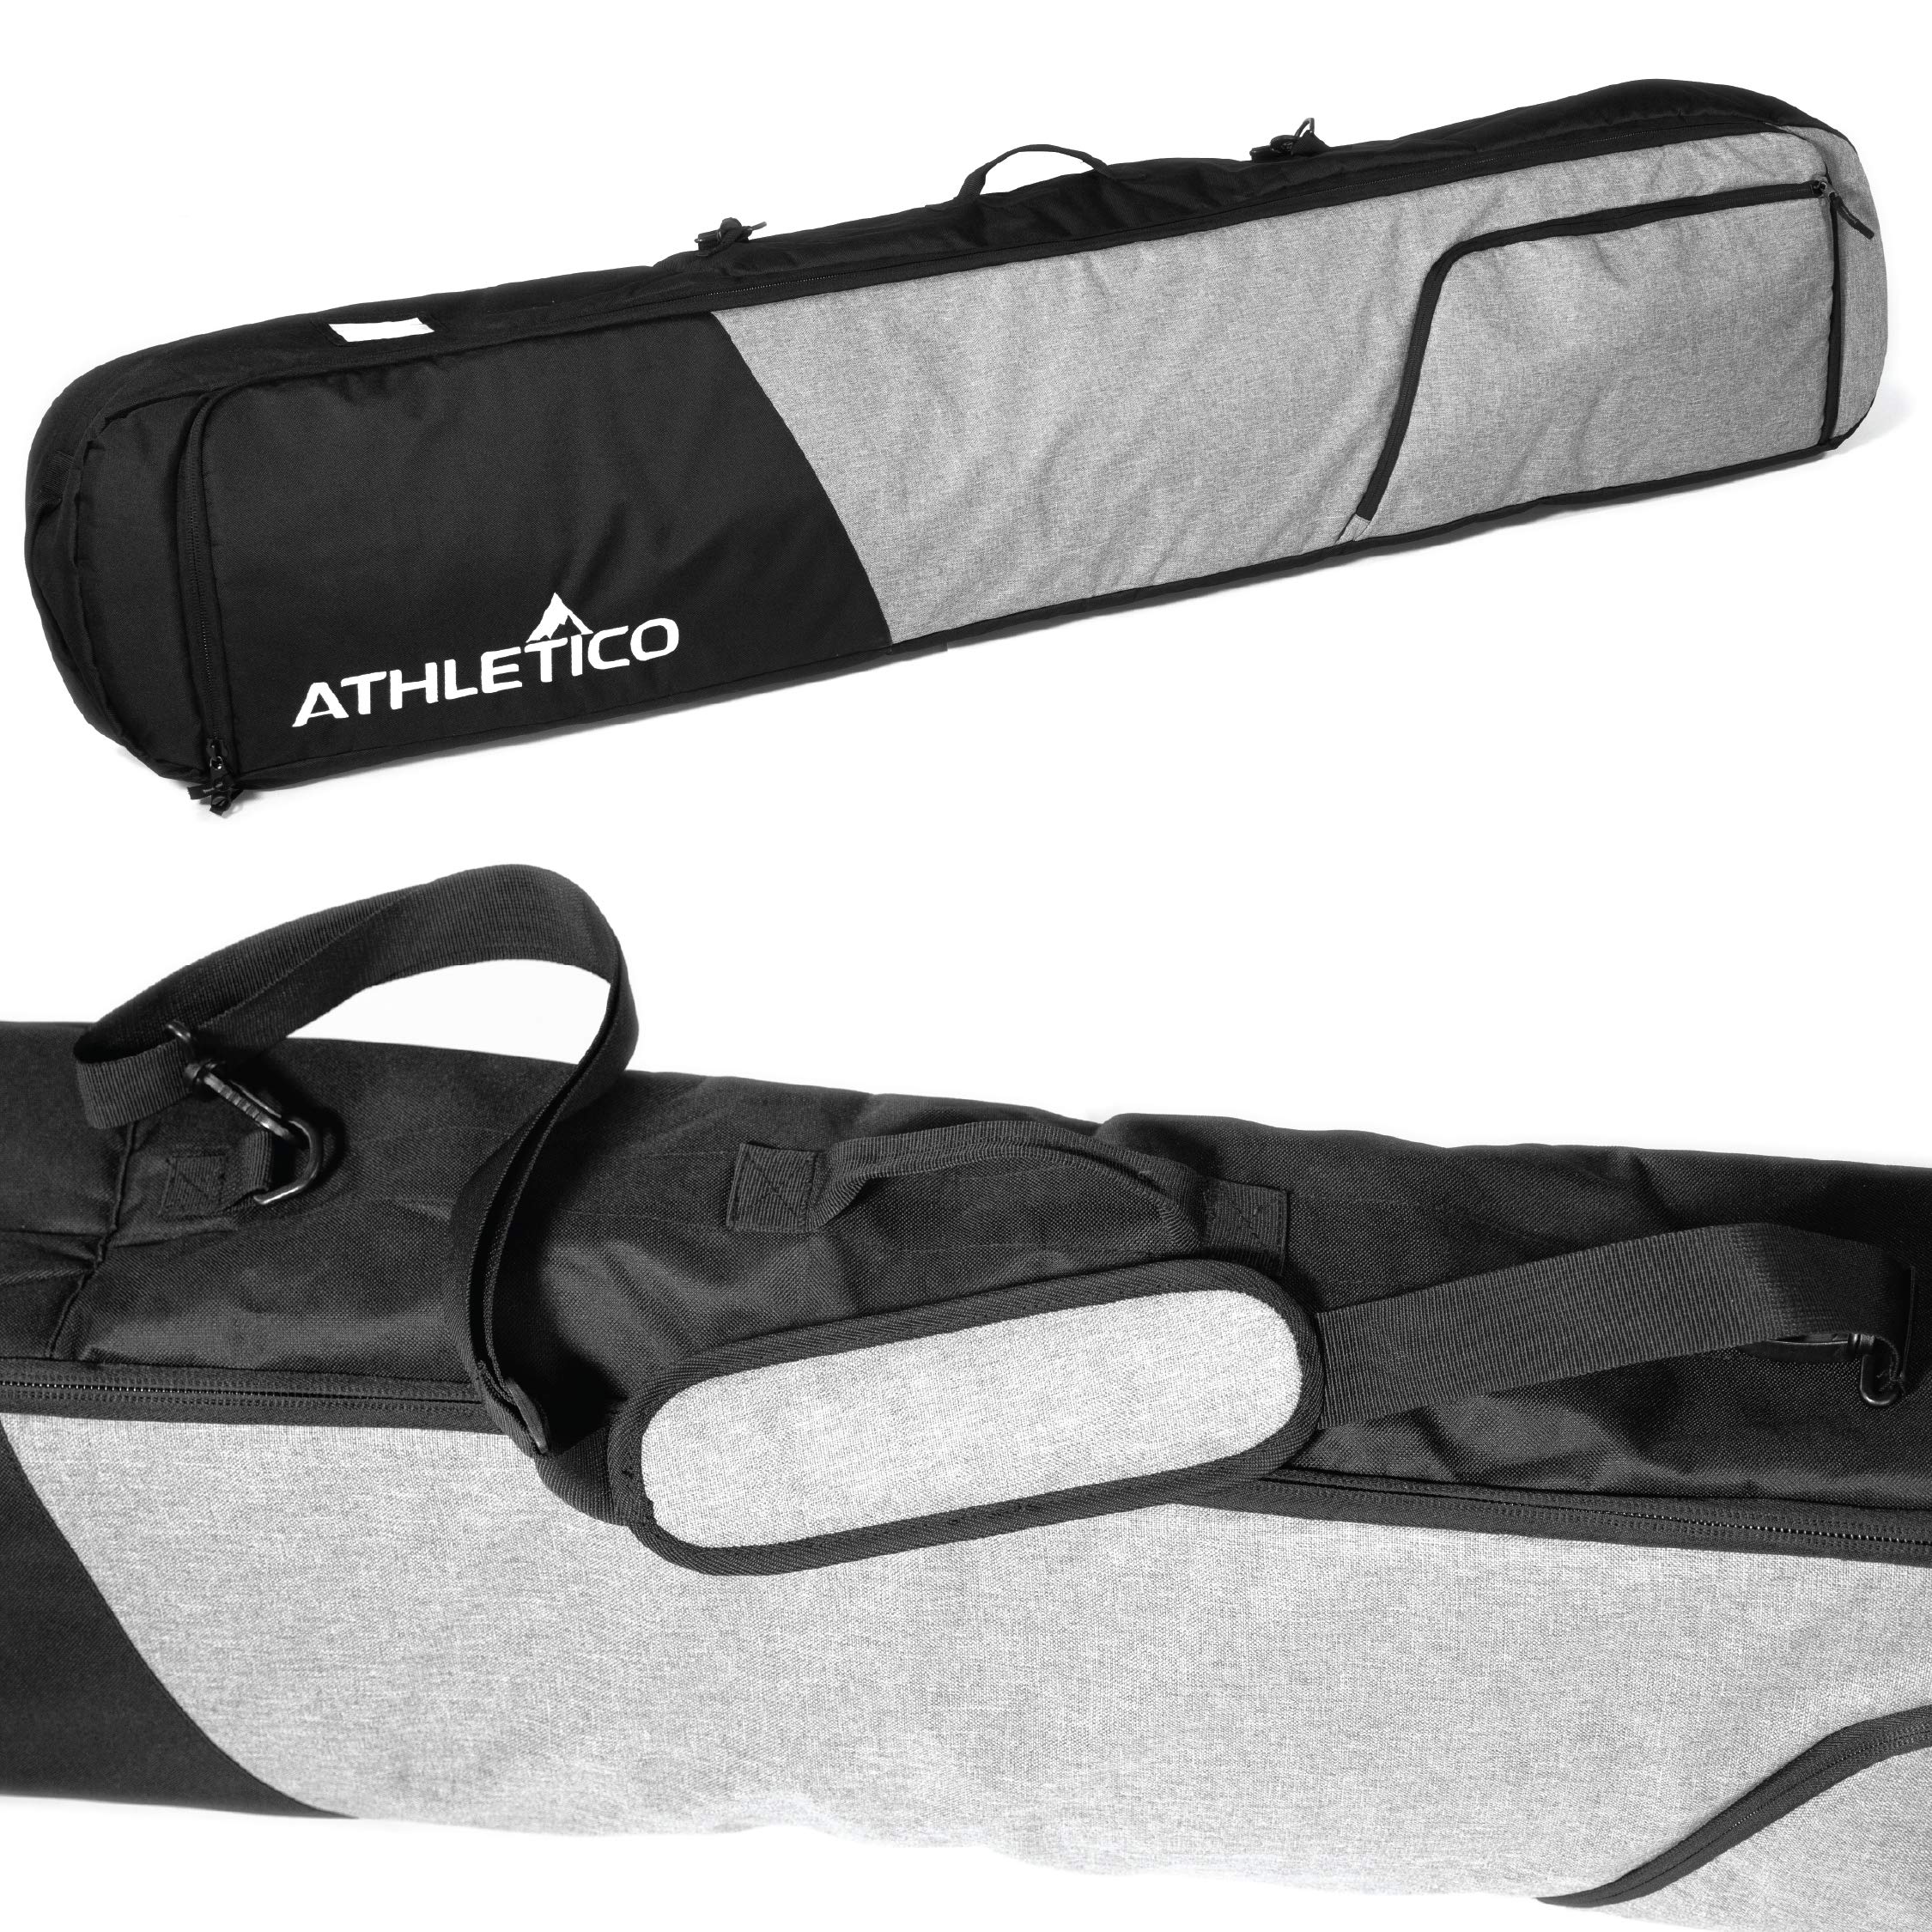 Athletico Peak Padded Snowboard Bag - Travel Bag for Single Snowboard and Snowboard Boots  - Acceptable